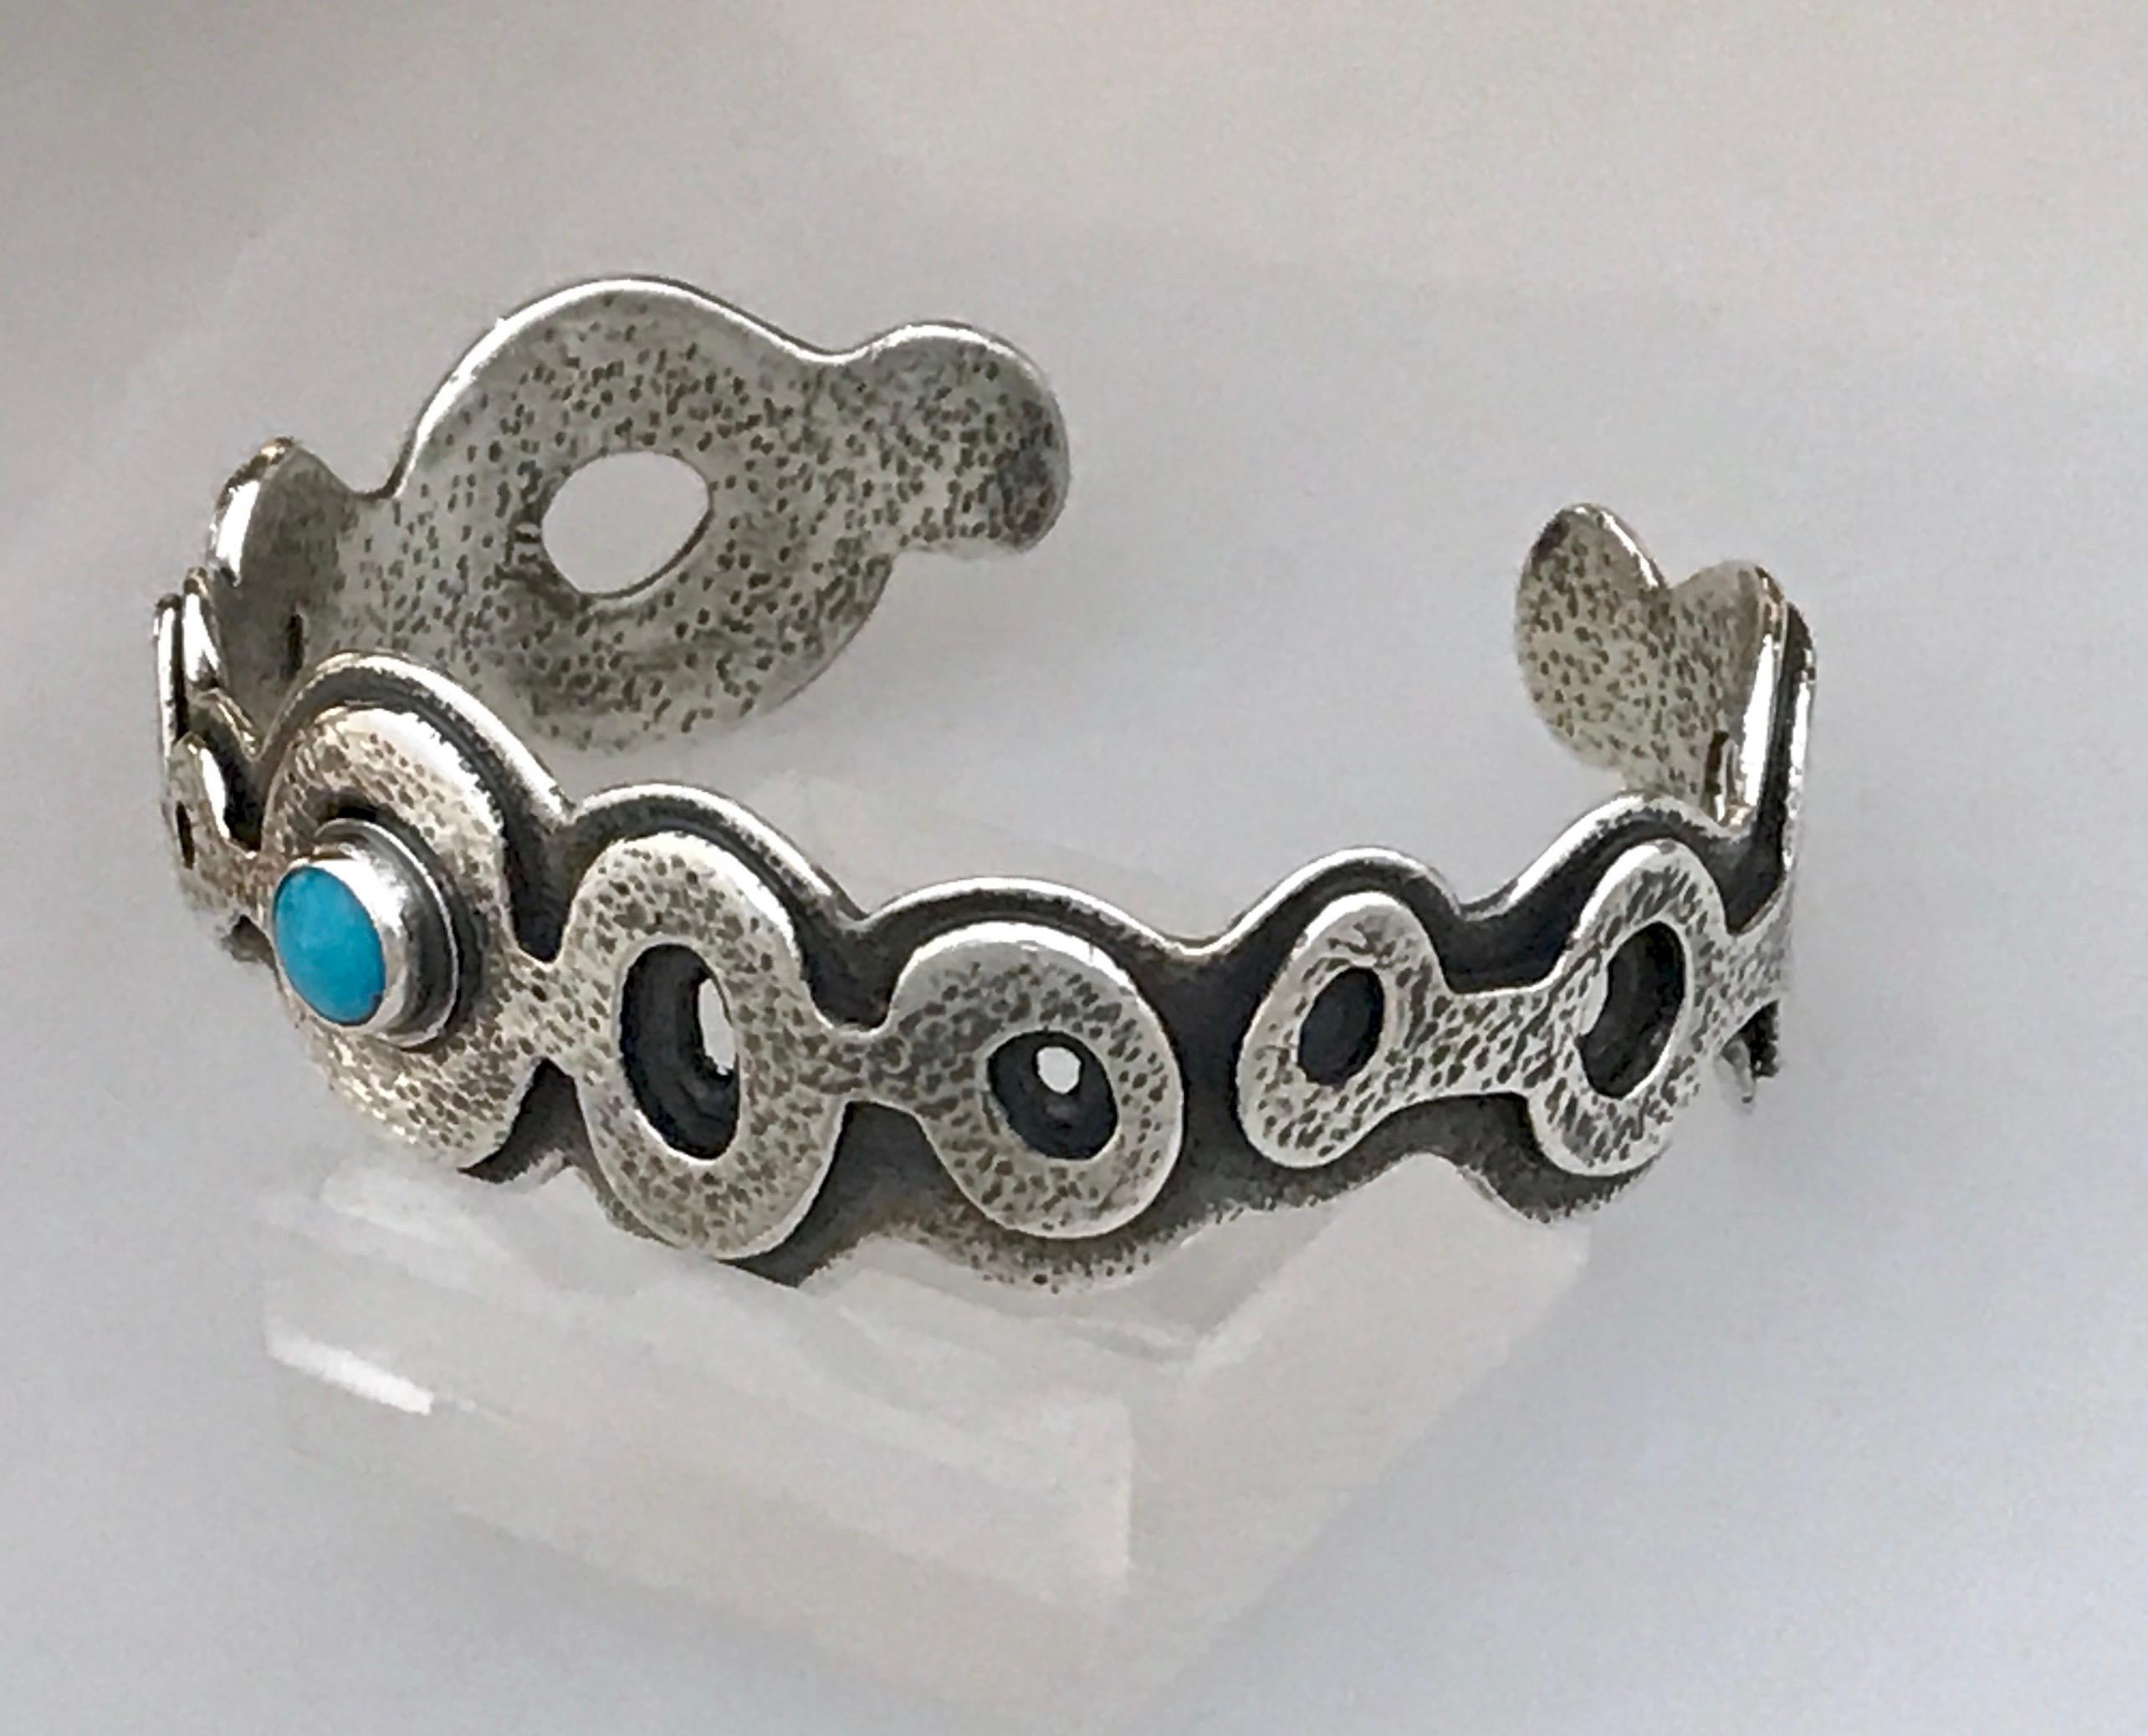 Contemporary Spirit Pond bracelet, by Melanie Yazzie, Sleeping Beauty Turquoise, cast, silver For Sale